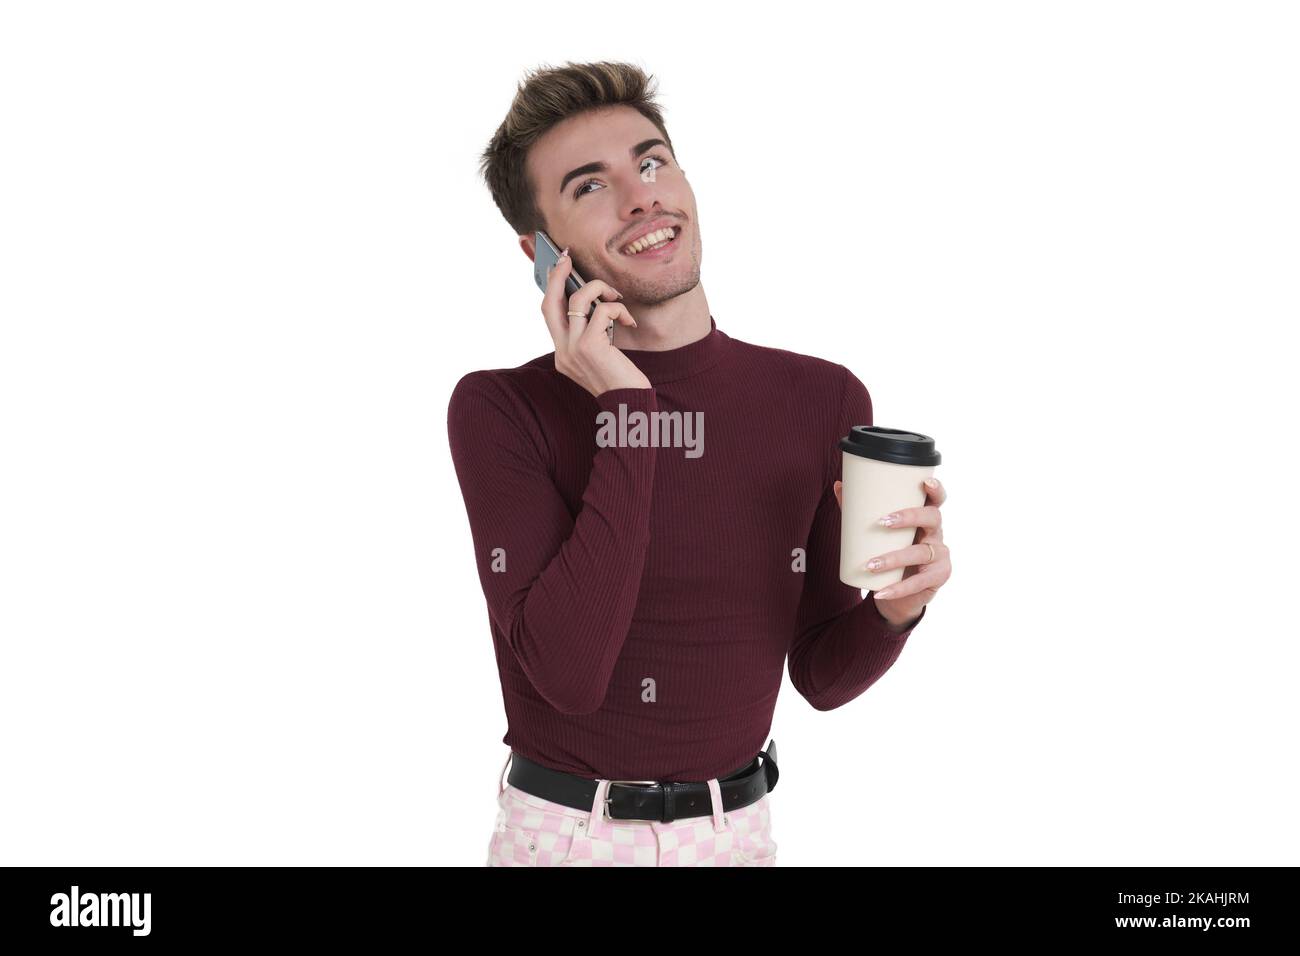 Young caucasian man smile speaking on the phone with a coffee cup, isolated. Stock Photo